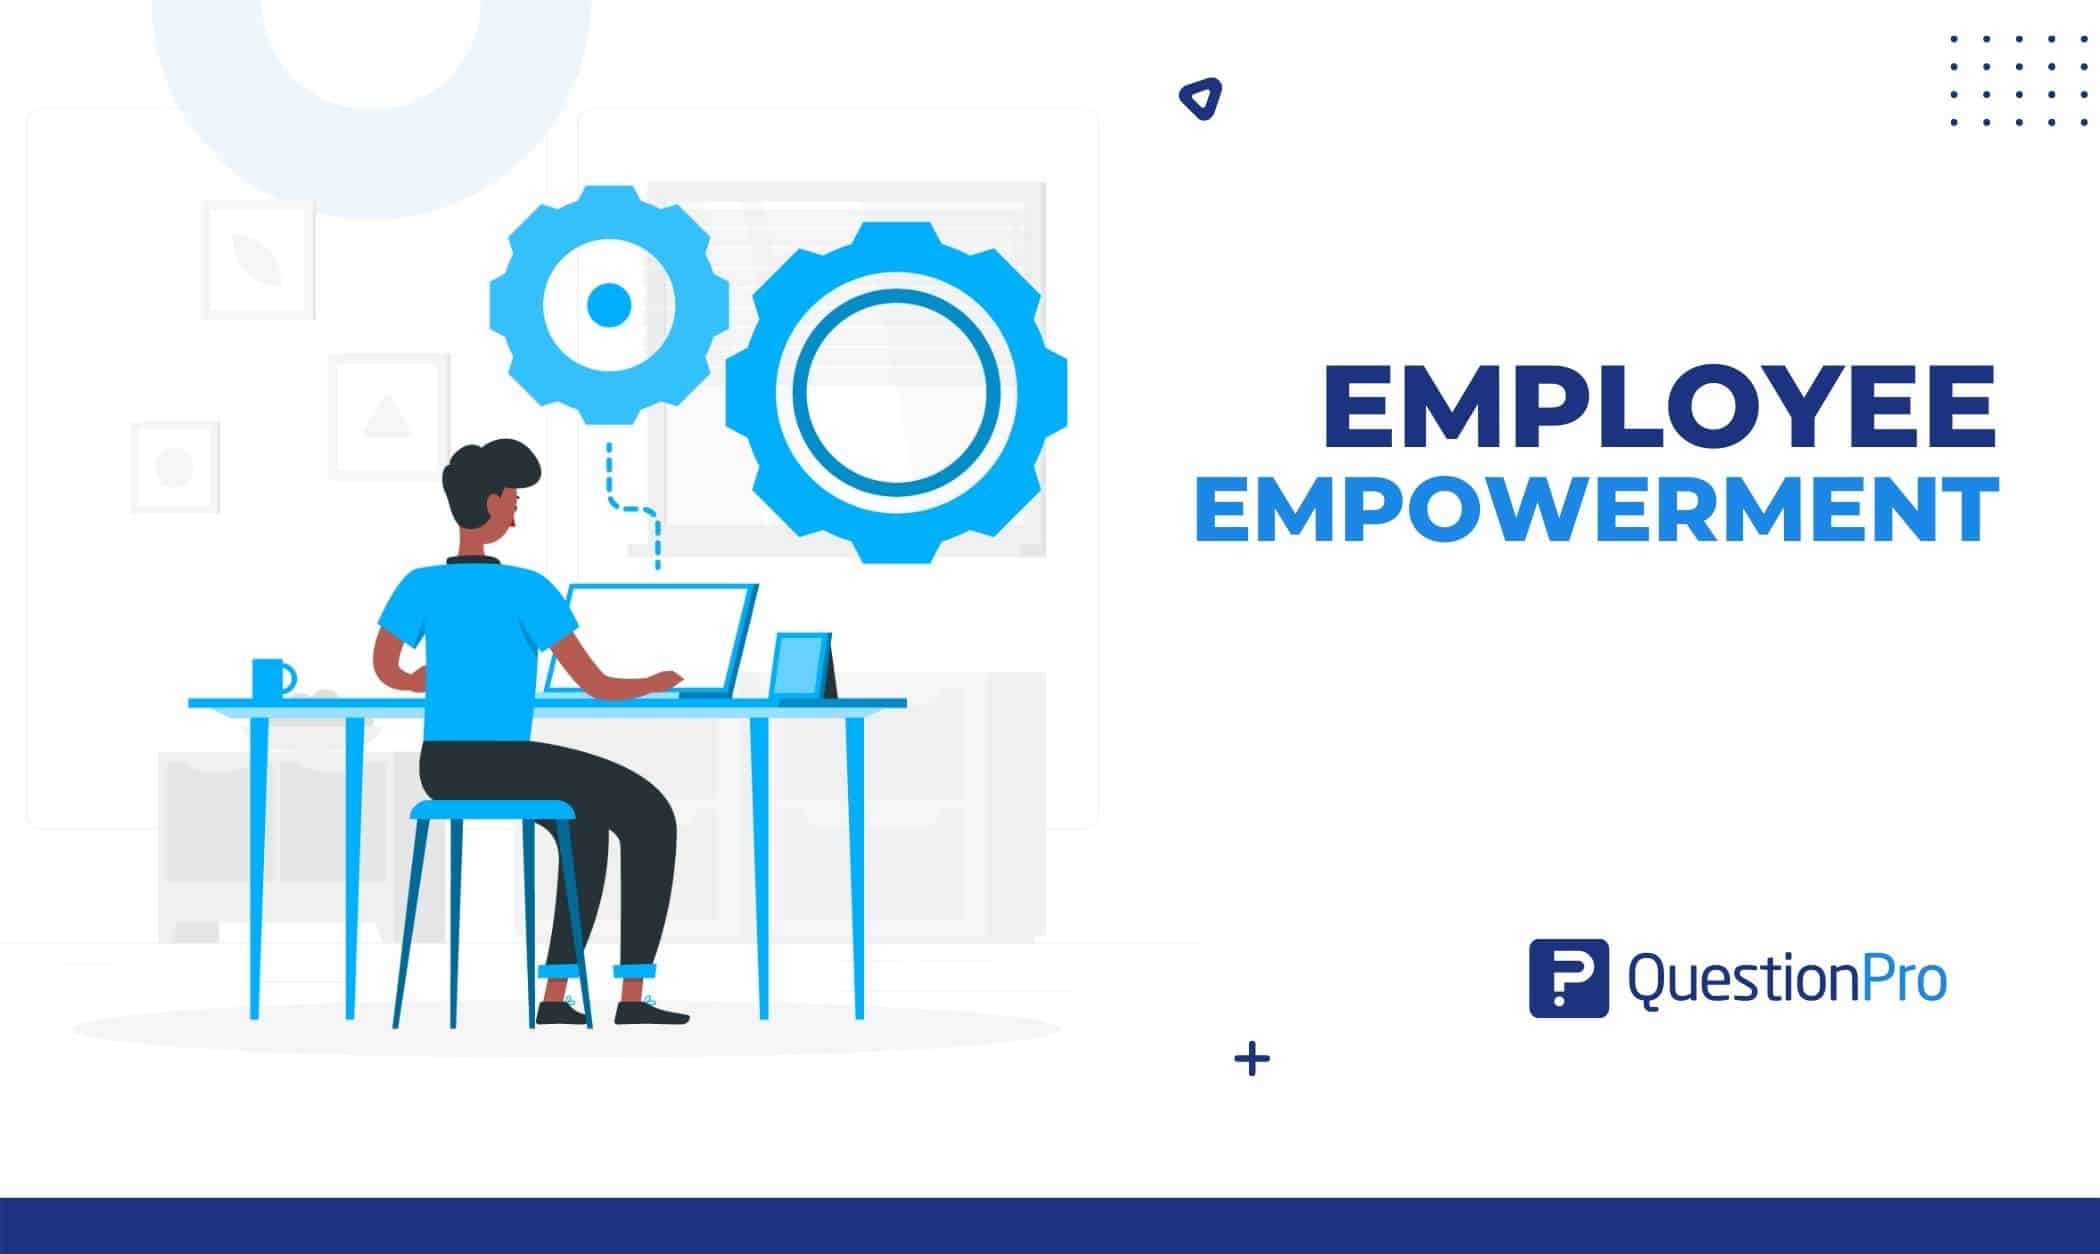 Employee empowerment creates an environment in the workplace that allows team members to work to their highest potential. Learn more.